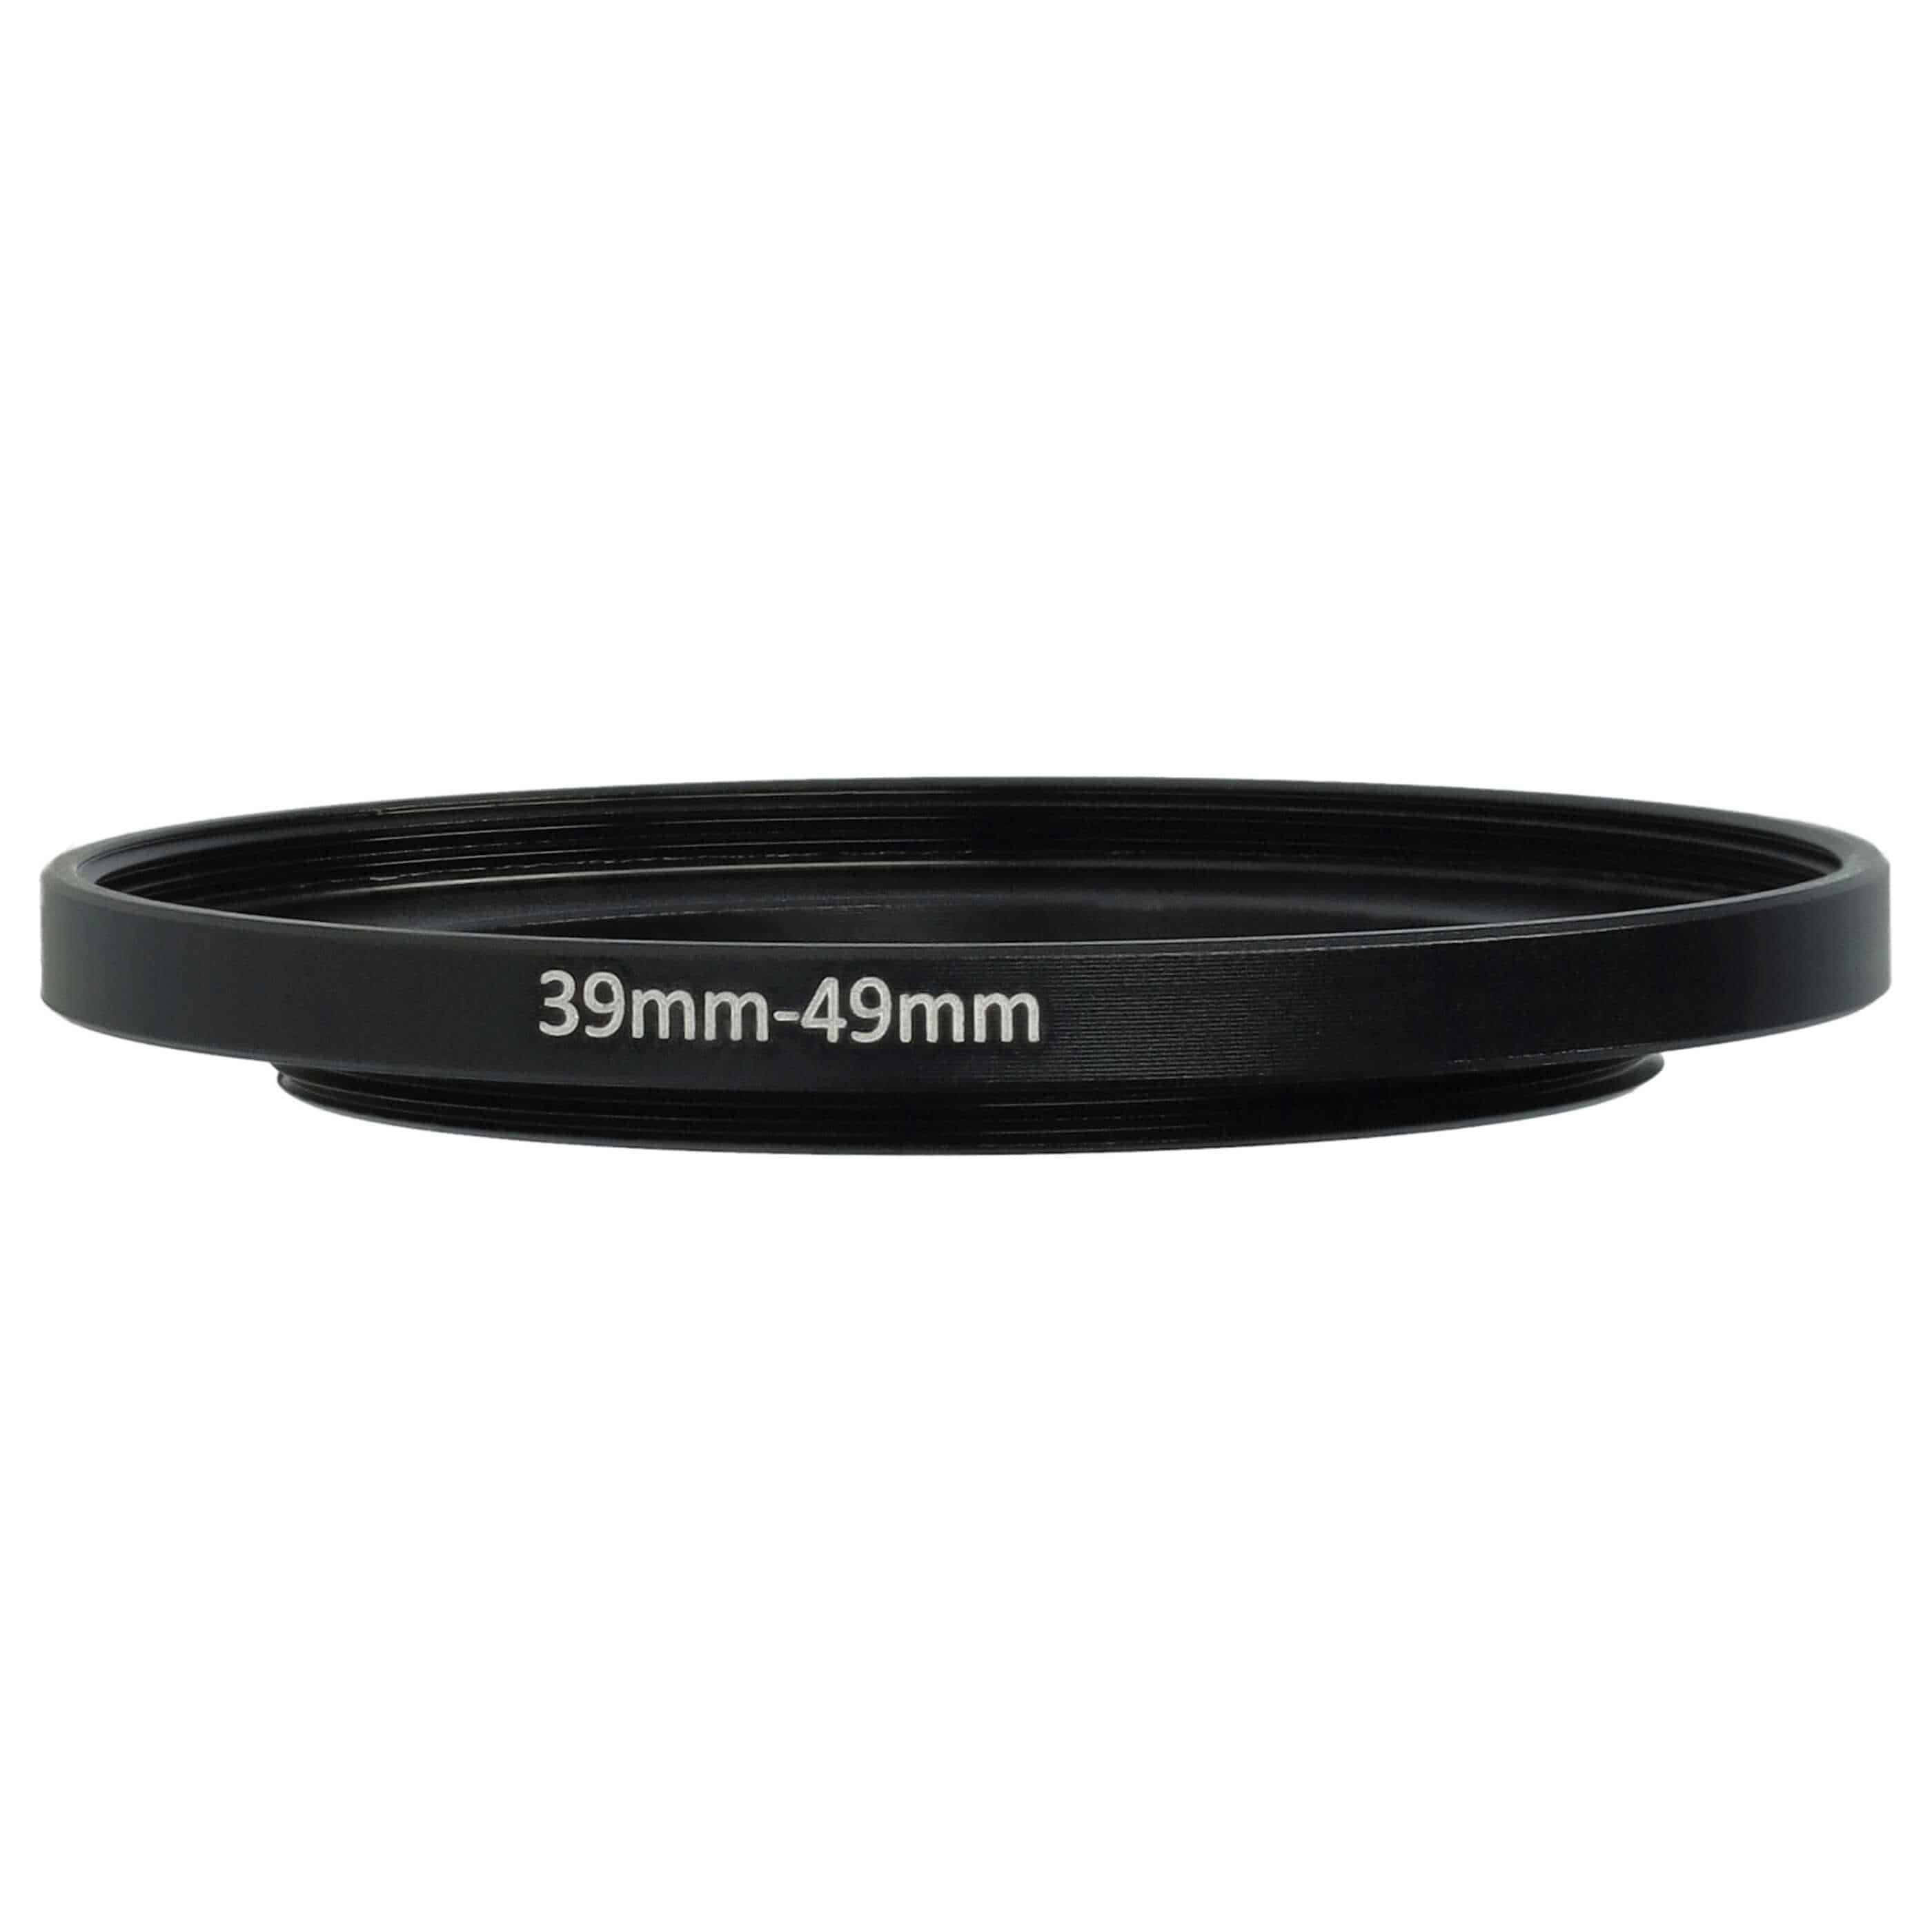 Step-Up Ring Adapter of 39 mm to 49 mmfor various Camera Lens - Filter Adapter